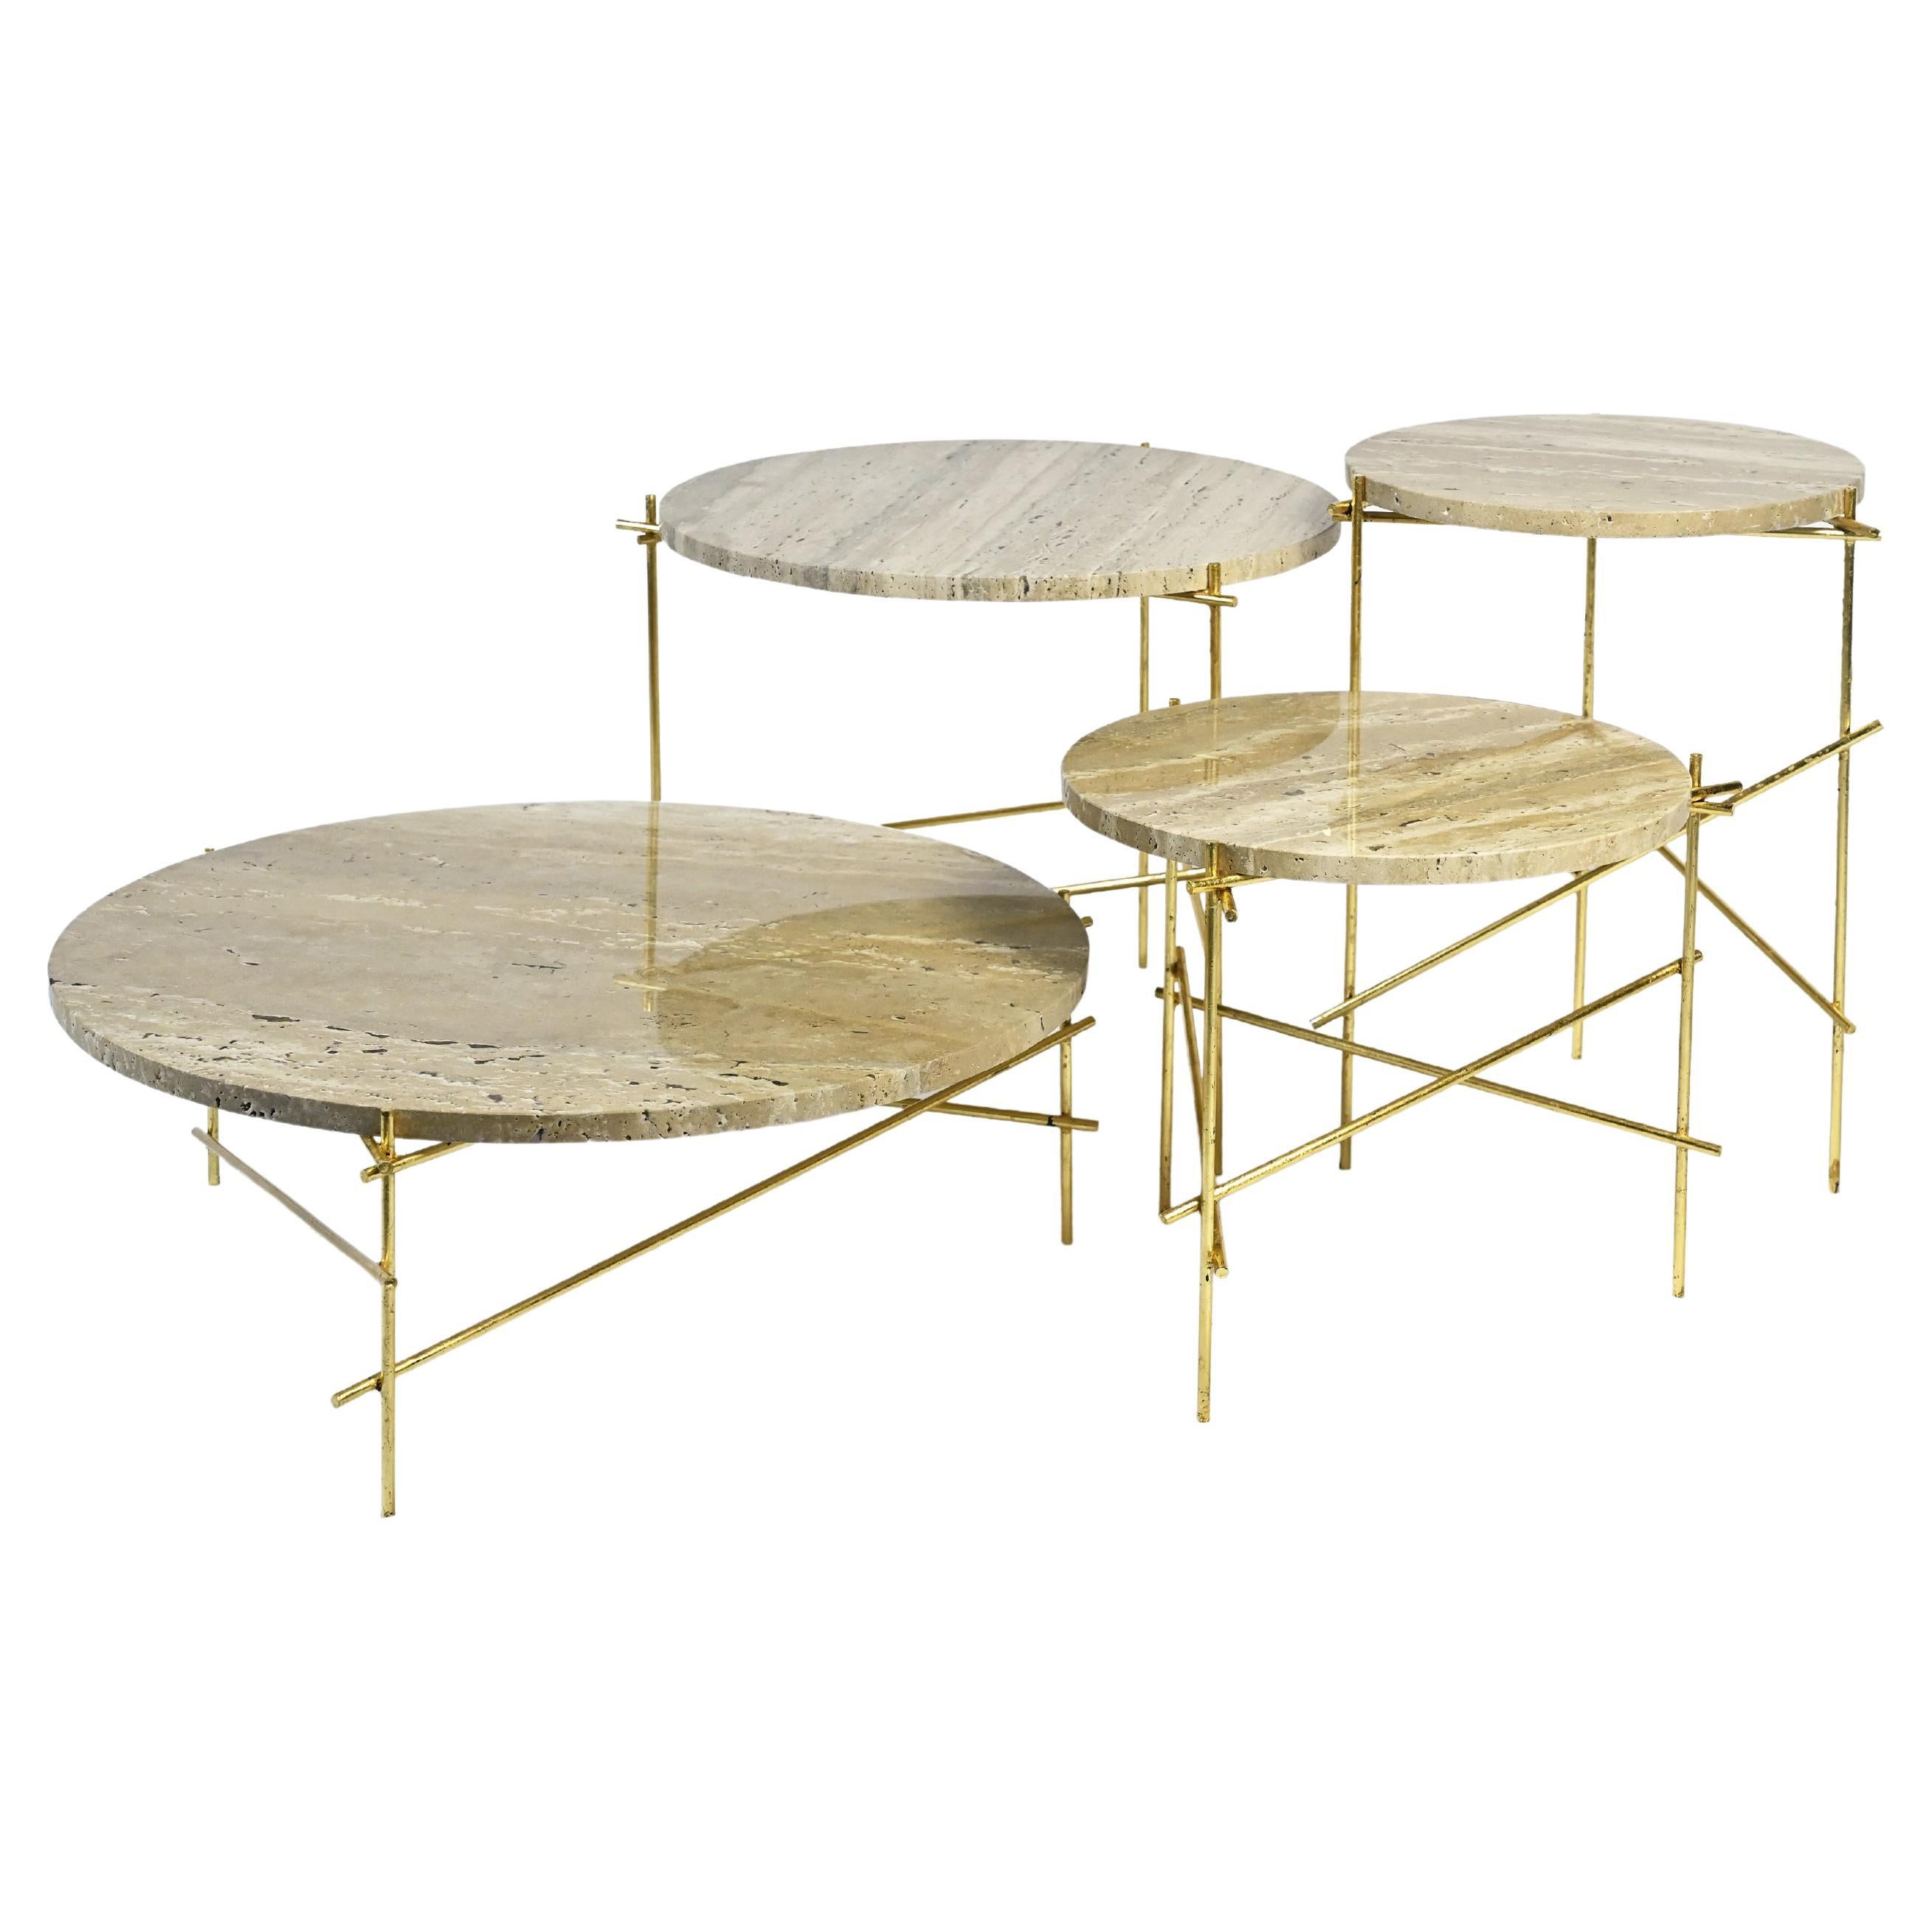 Slilts - Travertine and Gold Leaf Coffee Tables By DFdesignlab Handmade in Italy For Sale